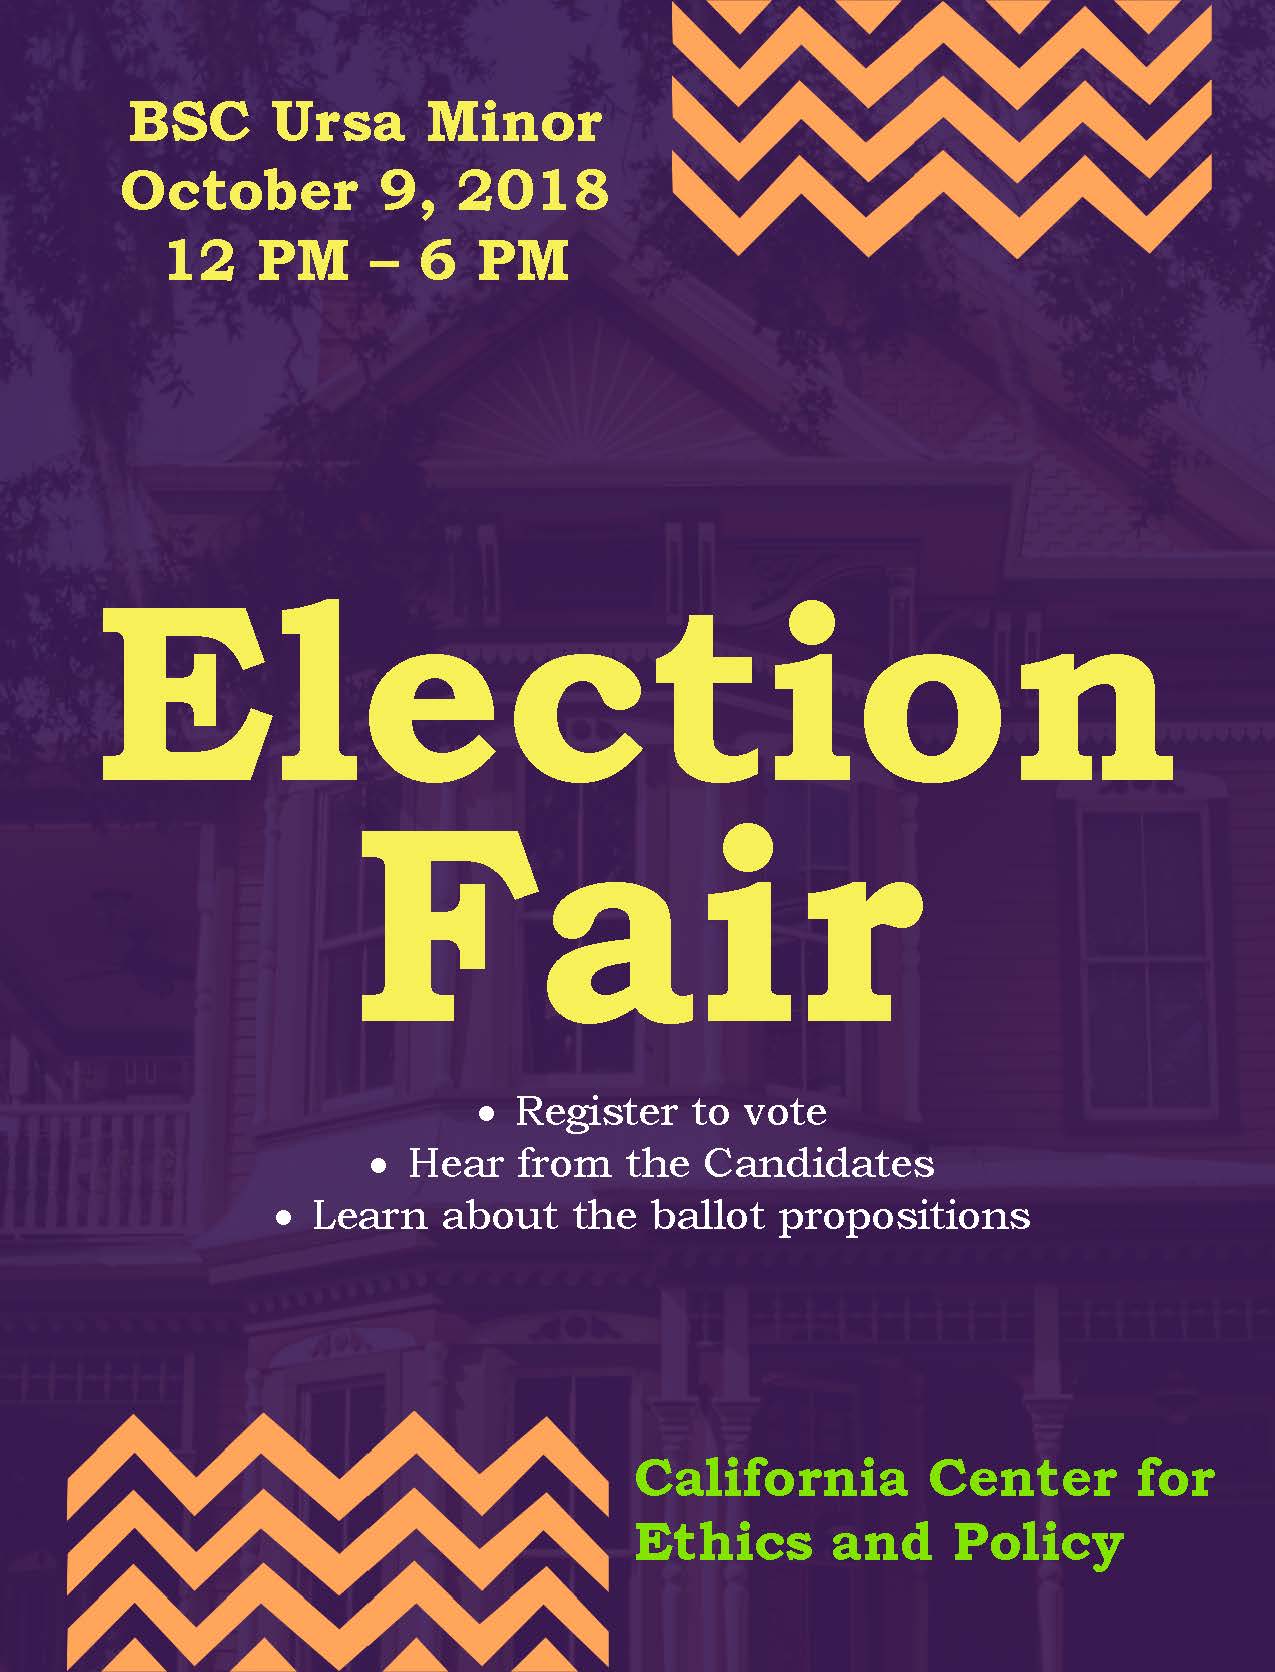 Election Fair Flyer, announcing that event will be held on October 9th from 12pm to 6pm in the Bronco Student Center, Ursa Minor Room